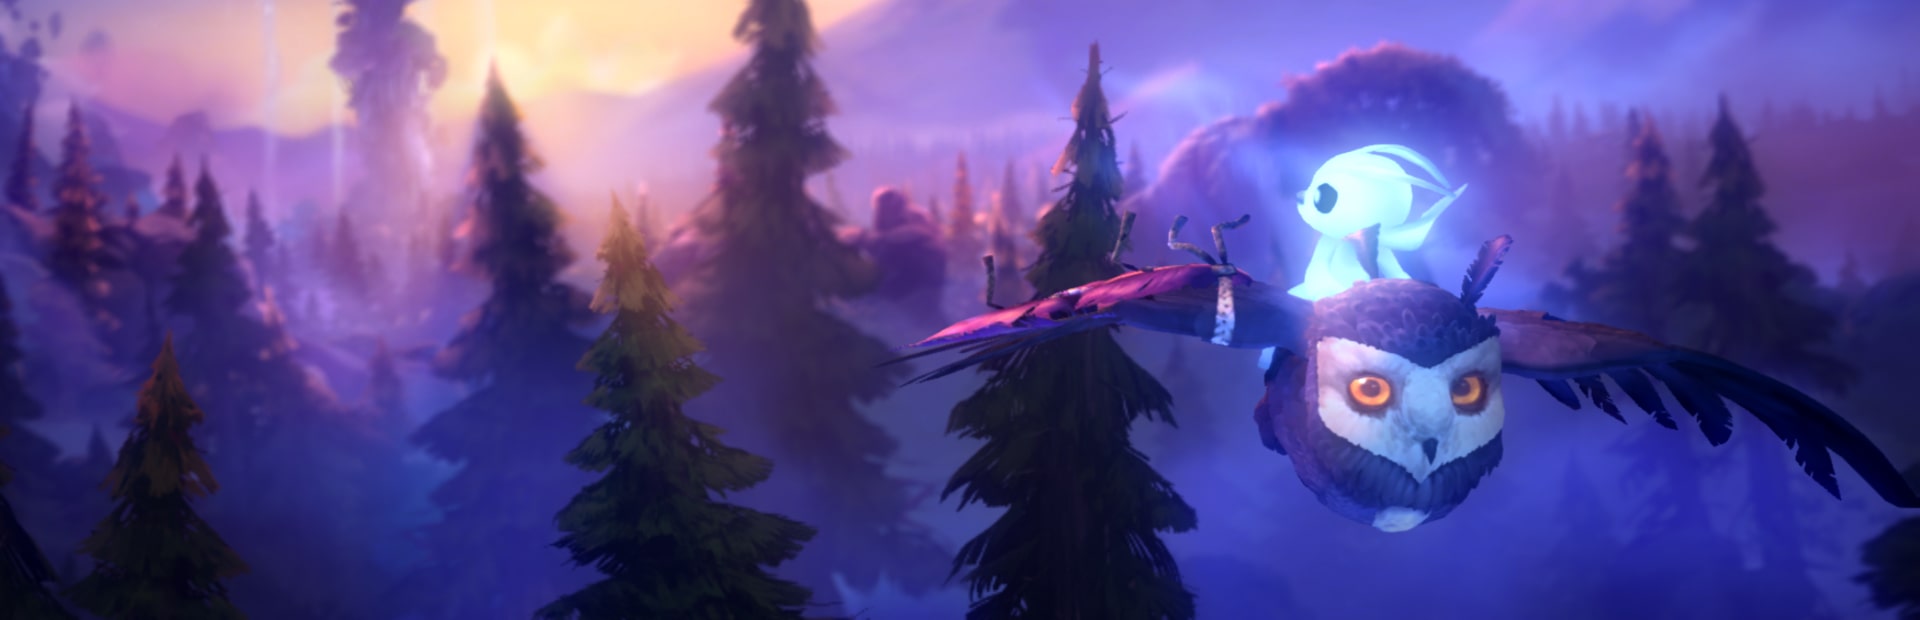 Ori and the Will of the Wisps for PC and Xbox One